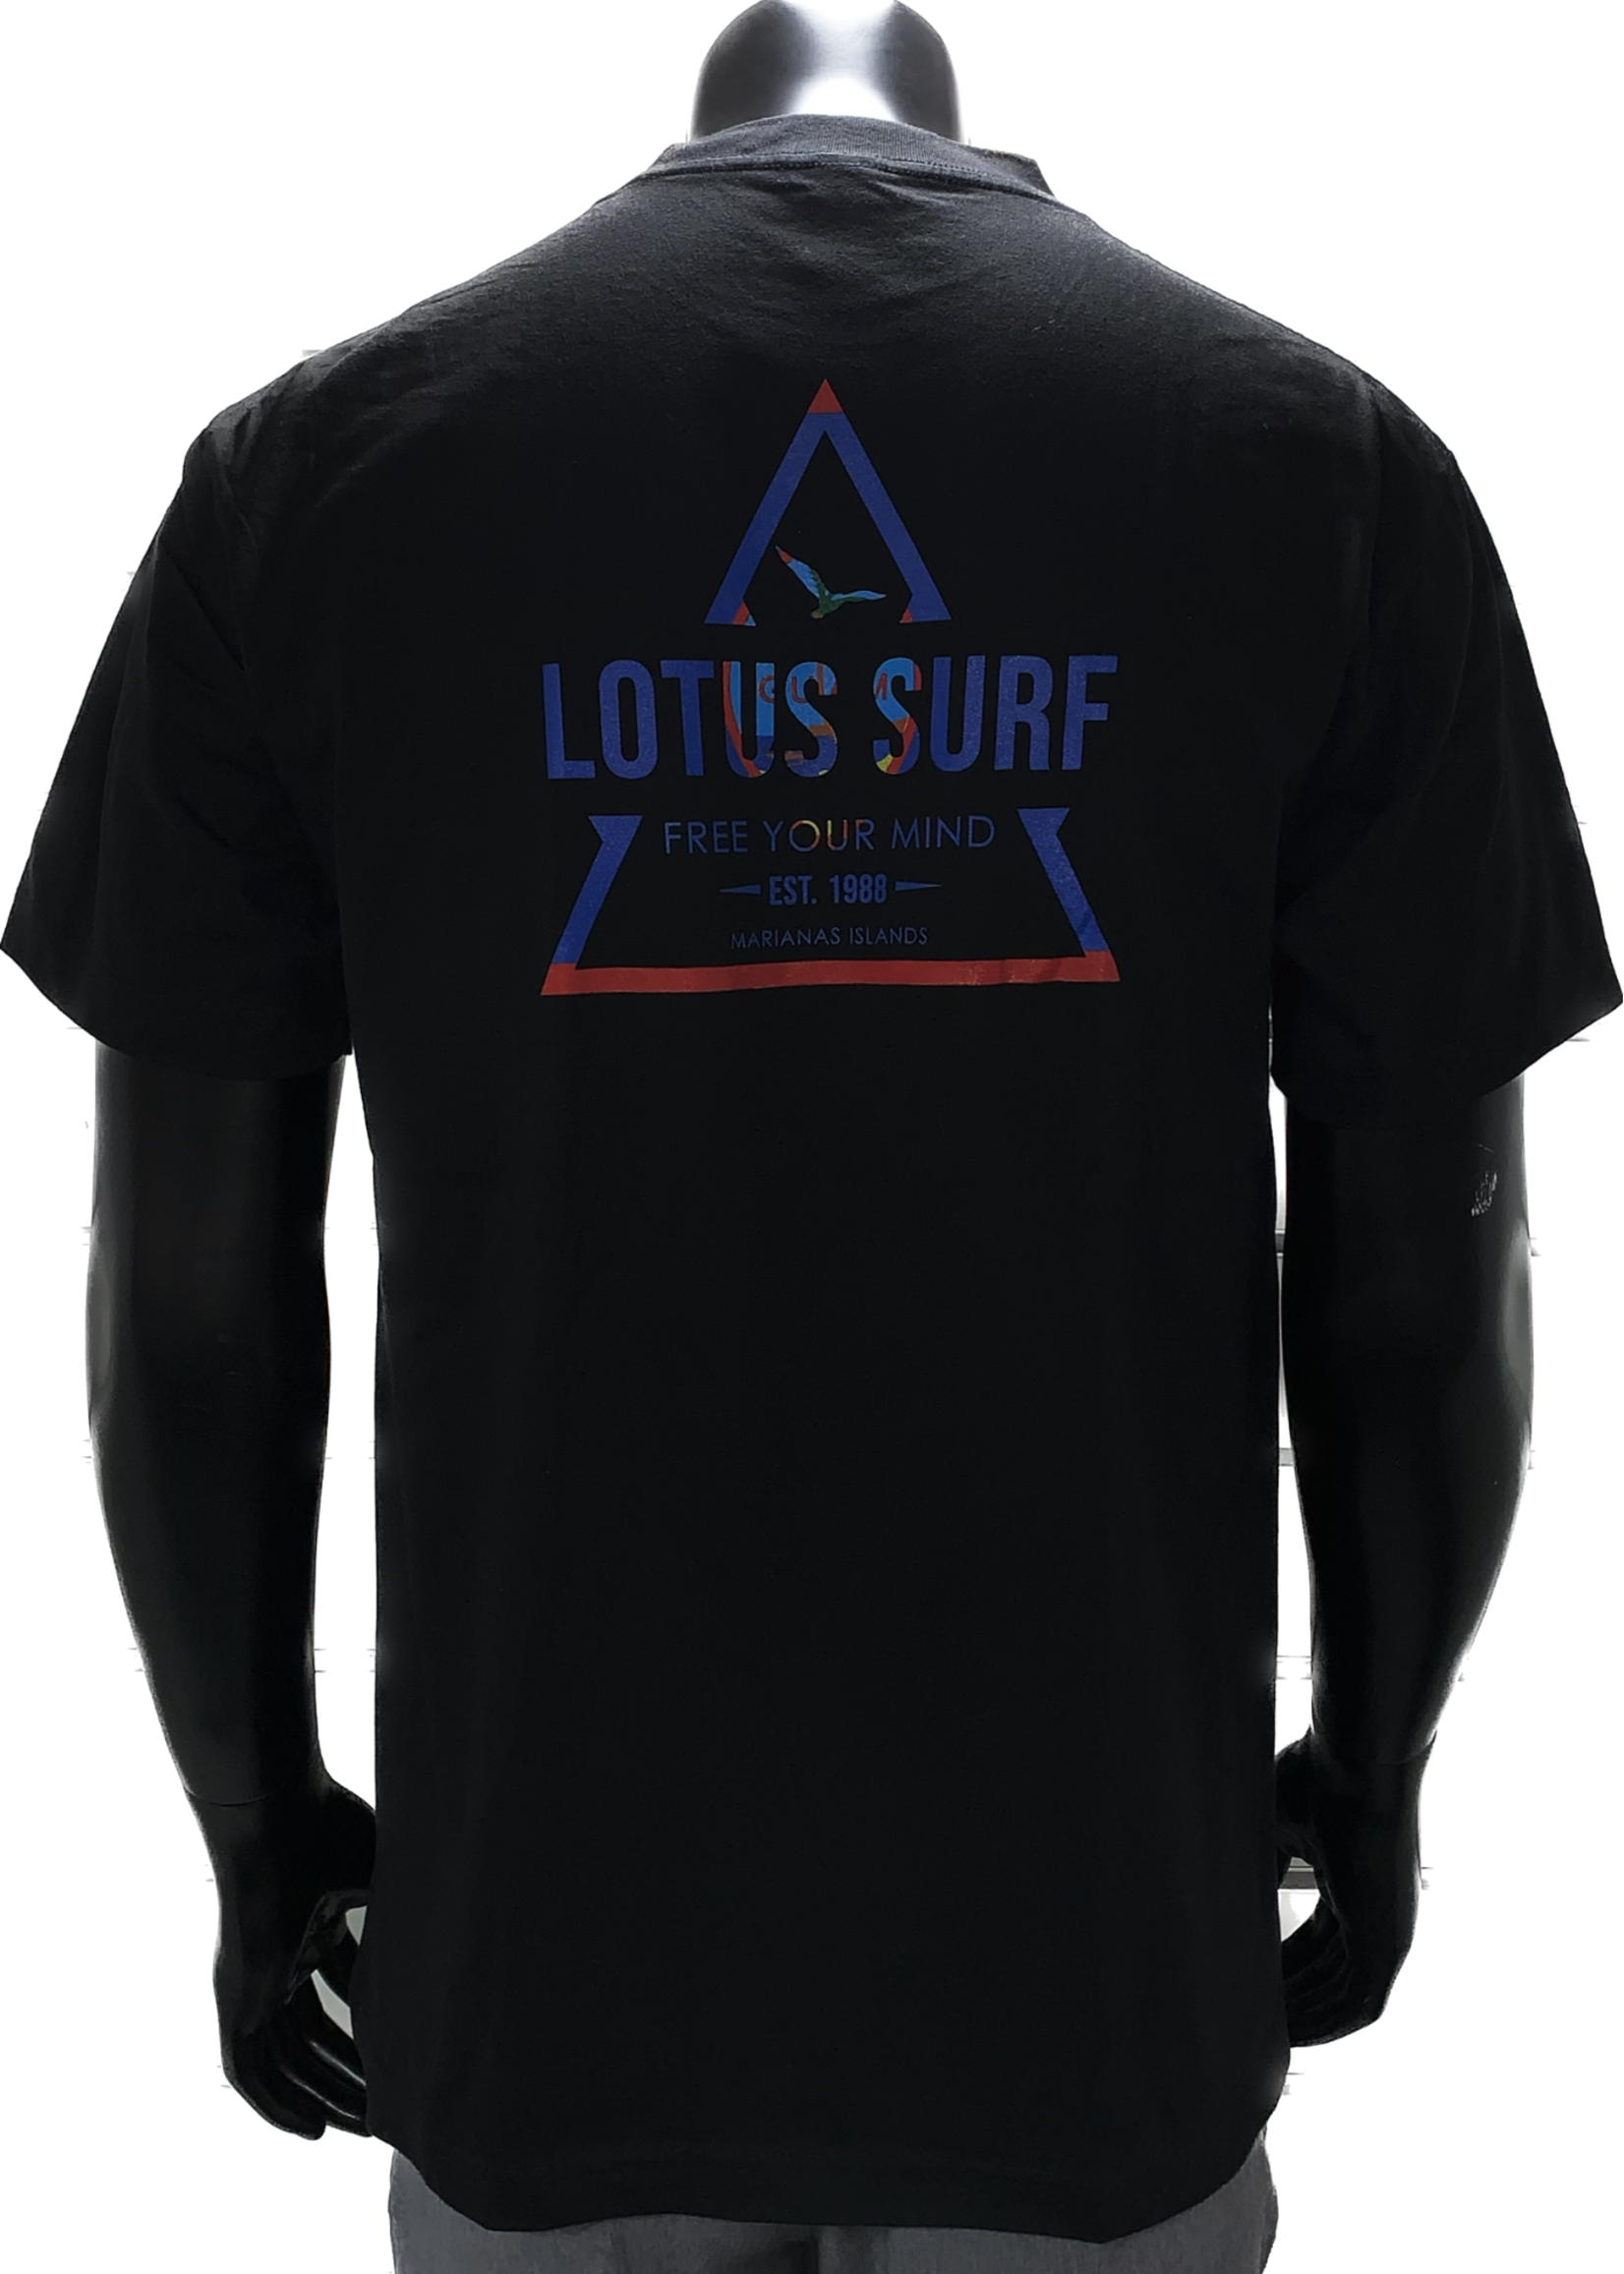 FREE YOUR MIND Lotus Surf Triangle Tee